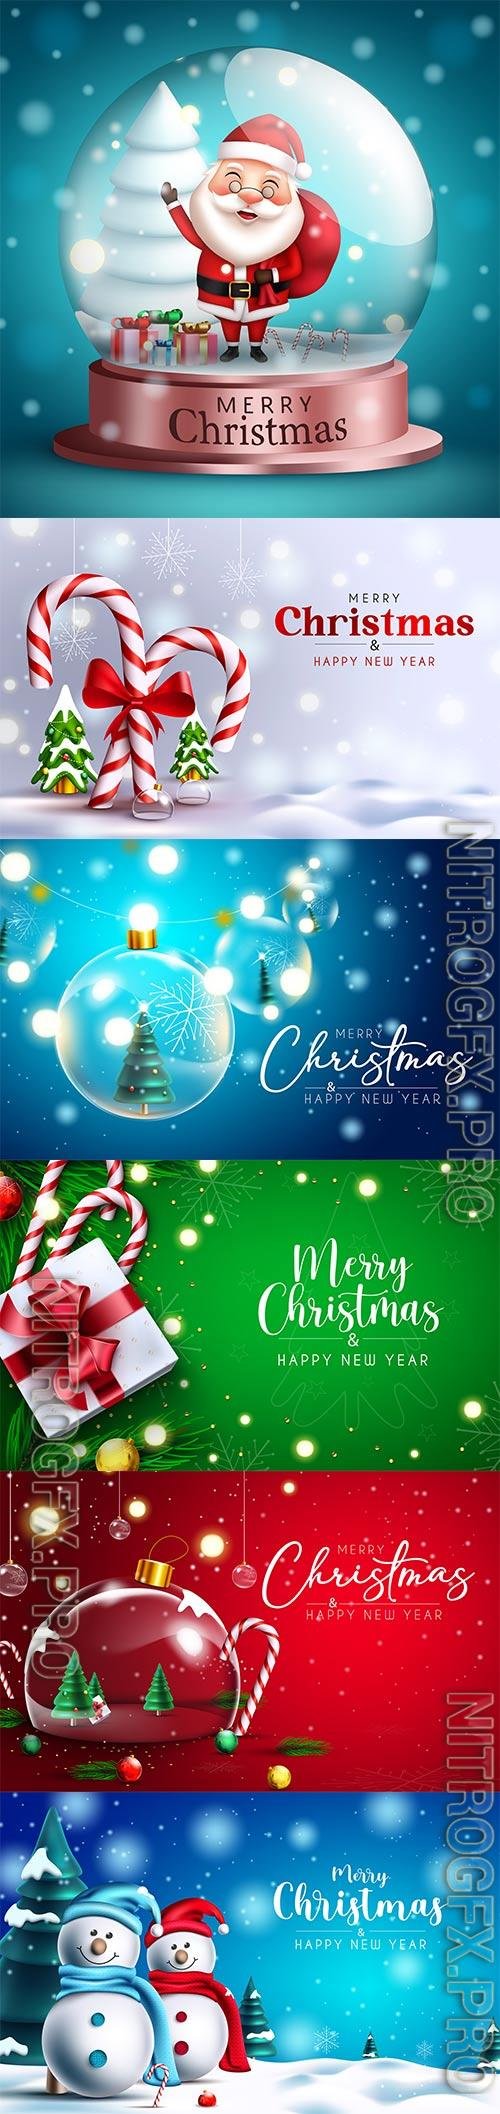 Christmas merry greeting vector set with santa claus